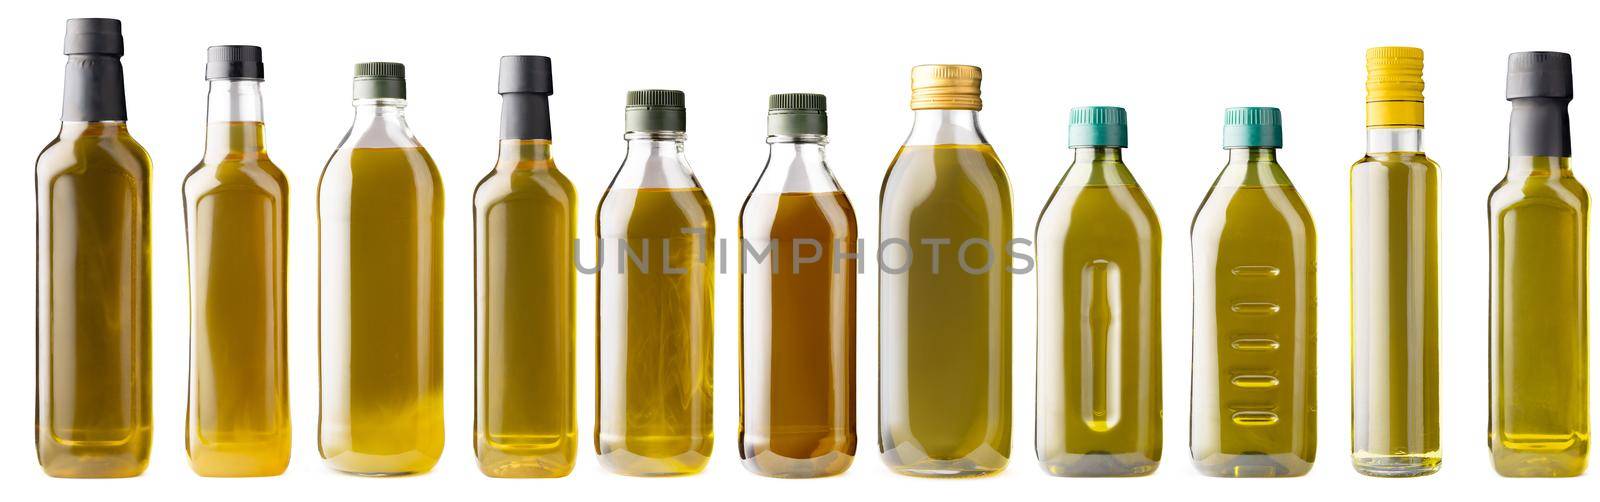 Row of olive oil bottles isolated on white background